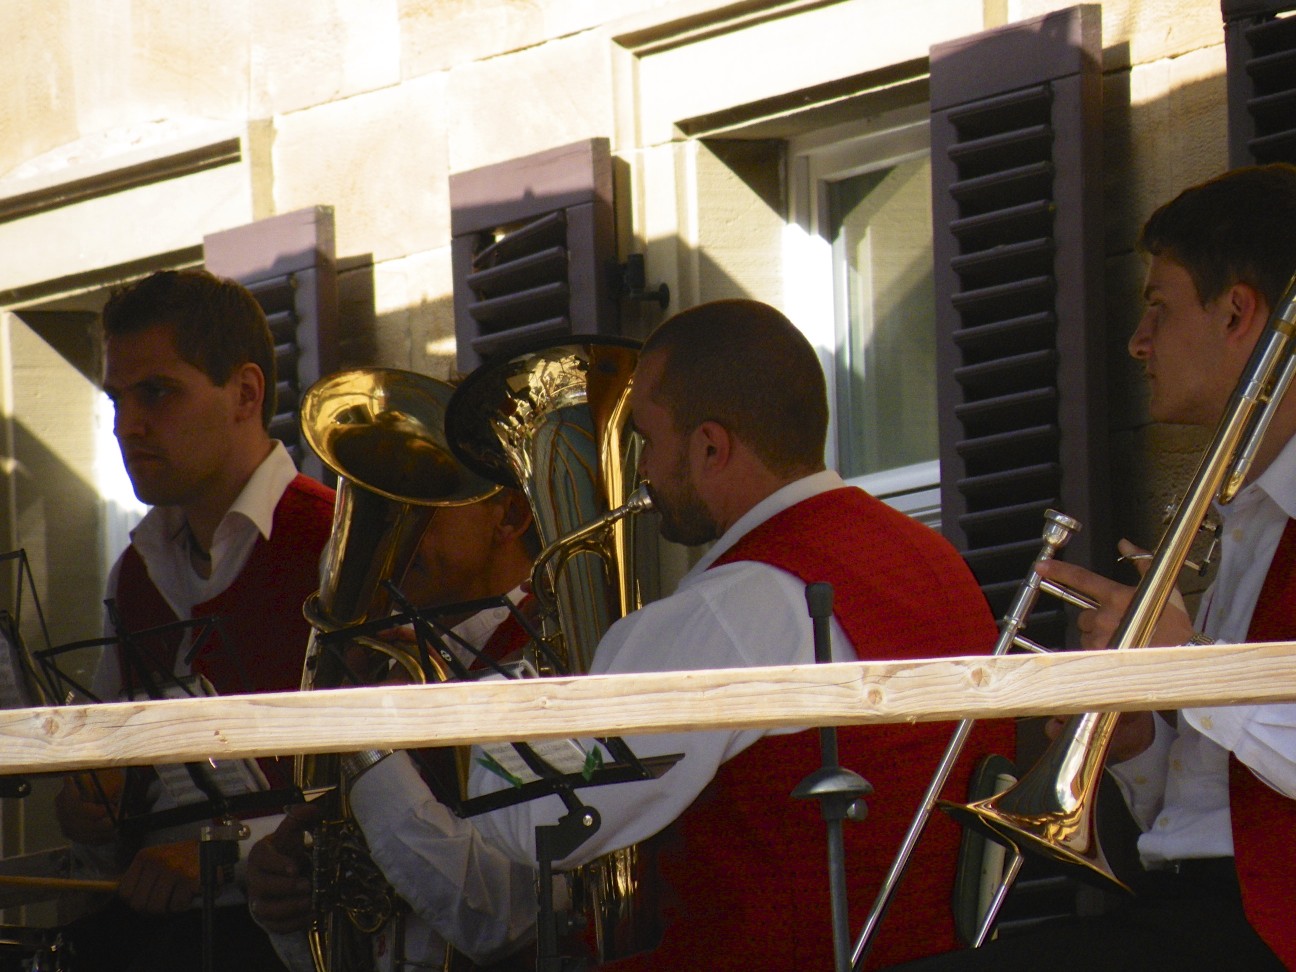 a group of men playing instruments near some windows